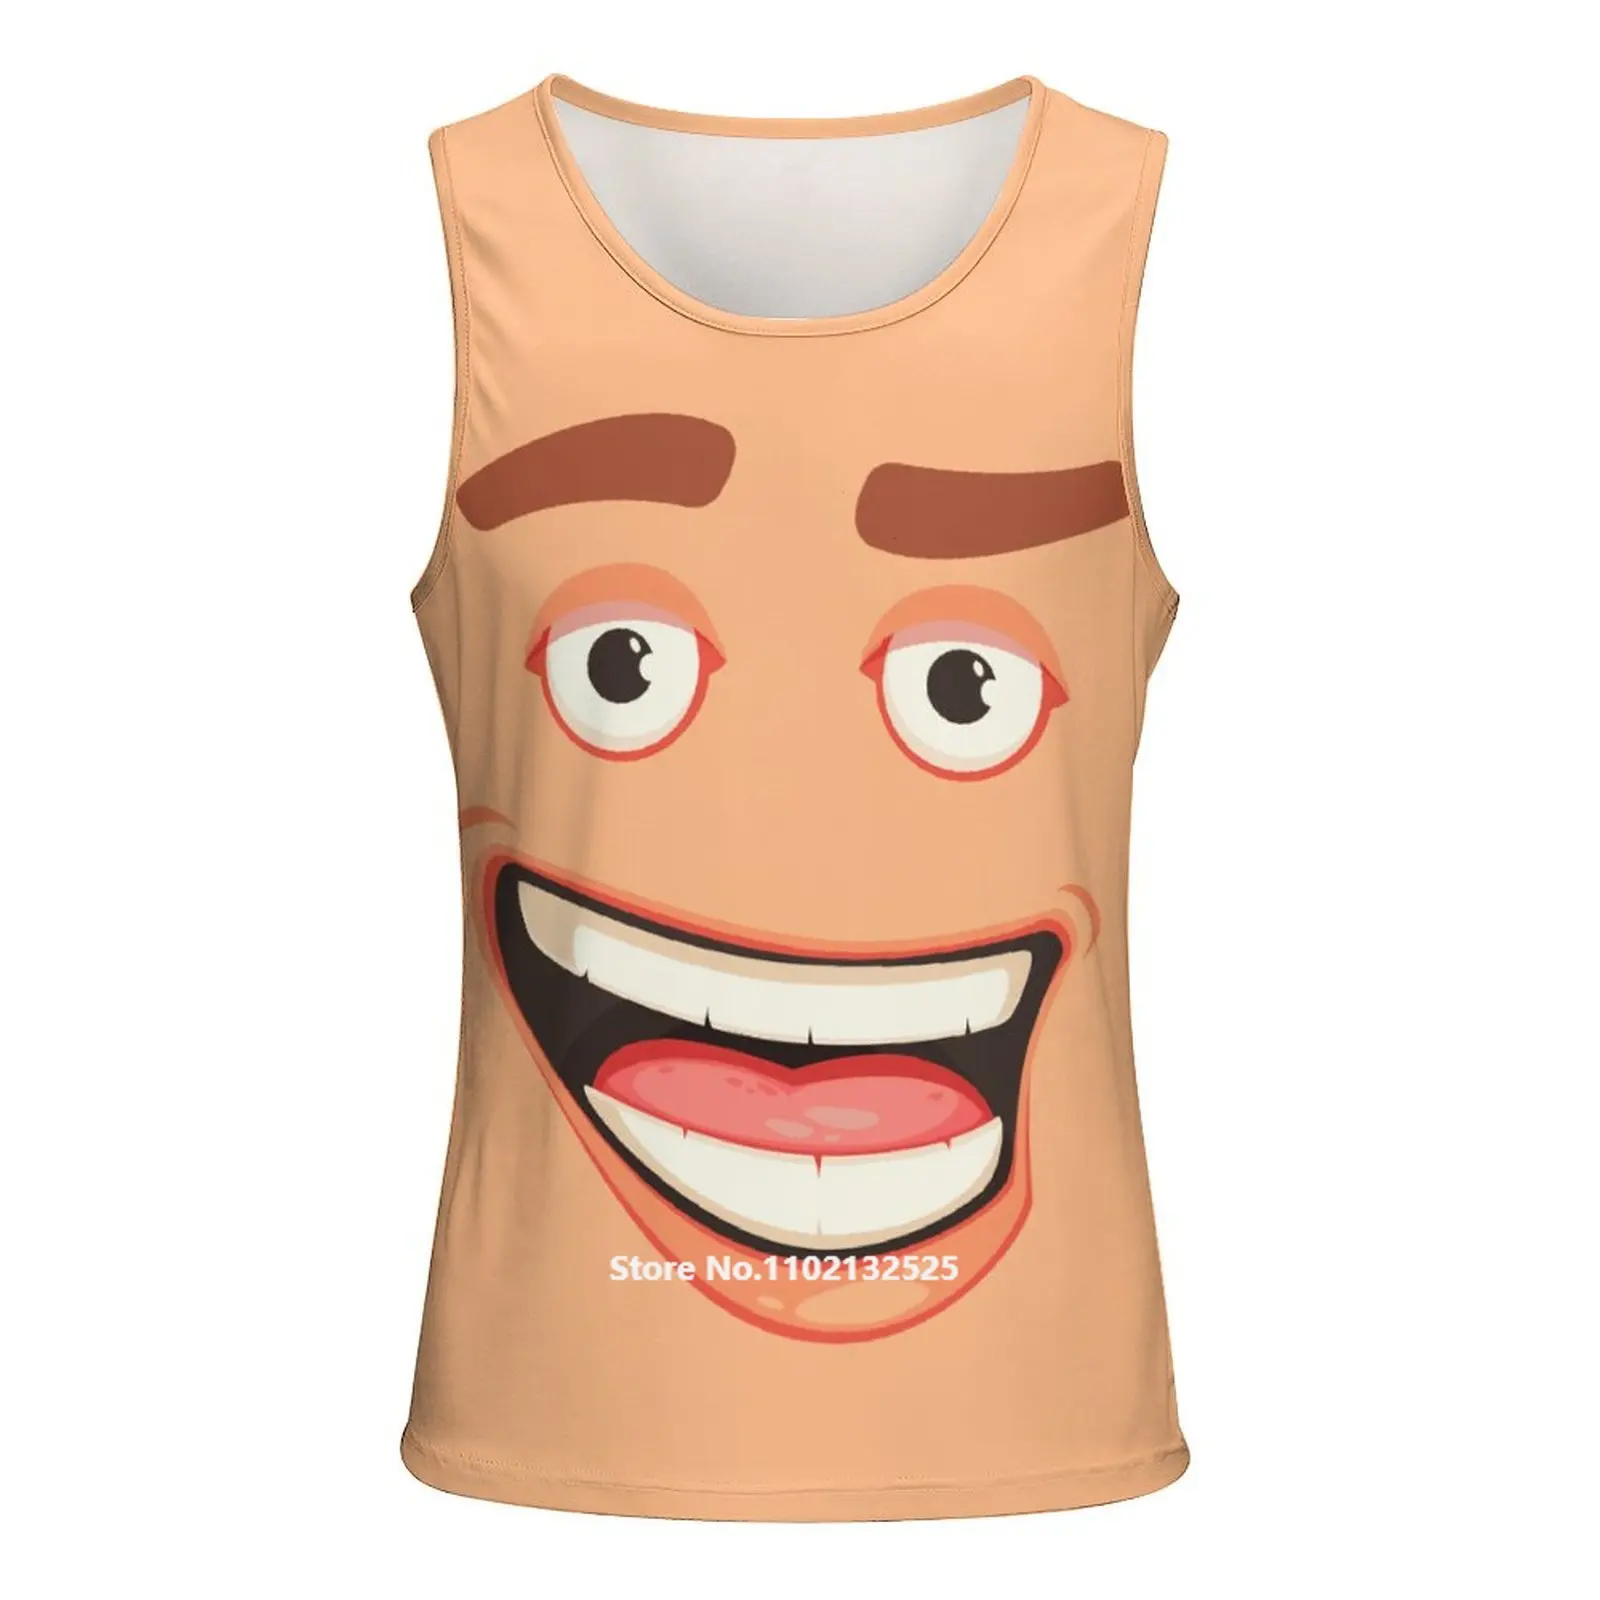 

Smile Expression Face Tank Top for Men 3D Print Sad Kiss Laughter Hope Emotion Funny Novelty Summer Sleeveless T Shirts